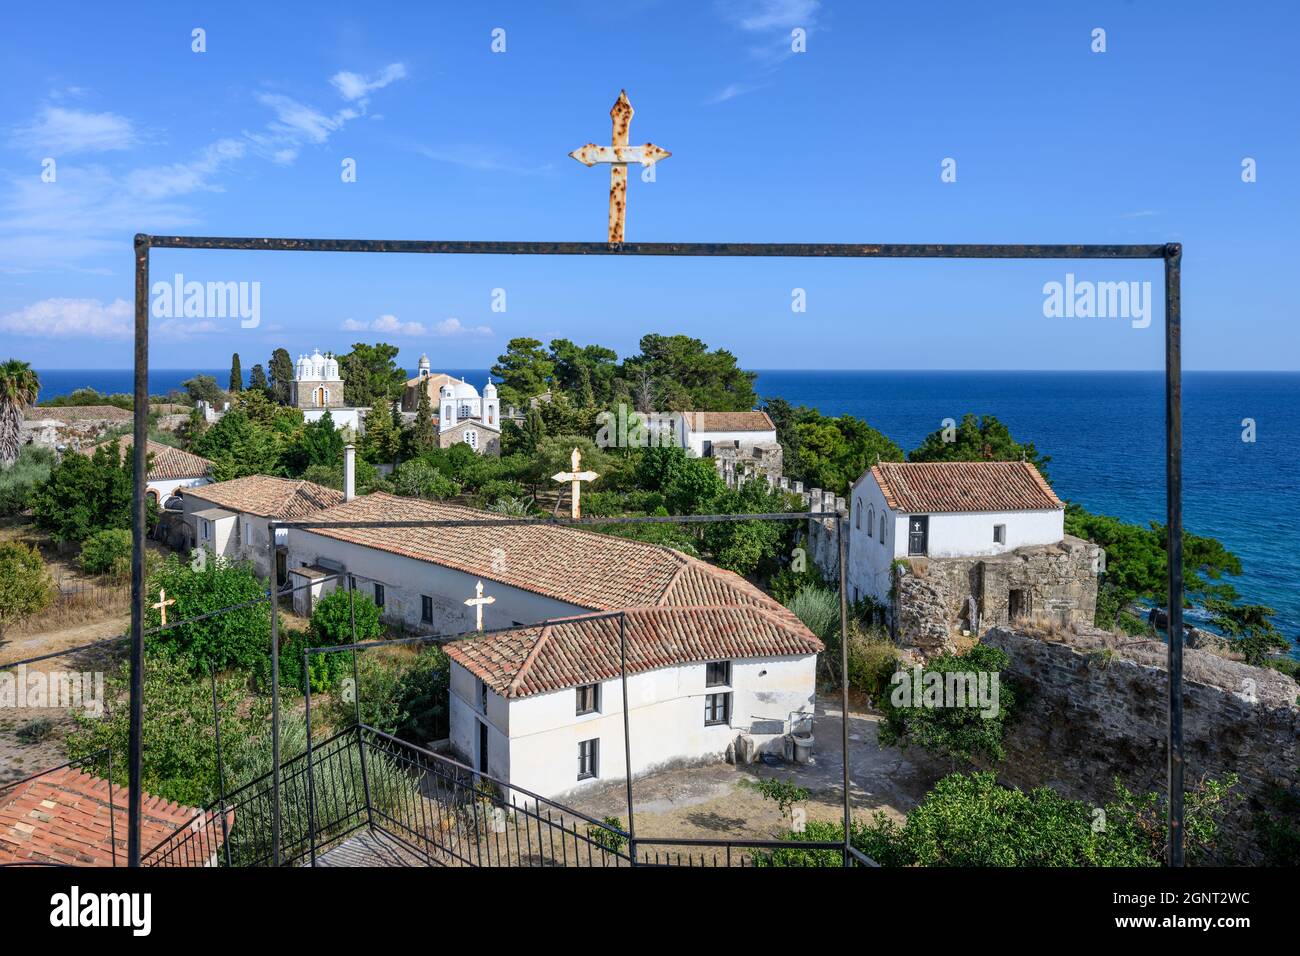 Page 3 - Ioannis High Resolution Stock Photography and Images - Alamy